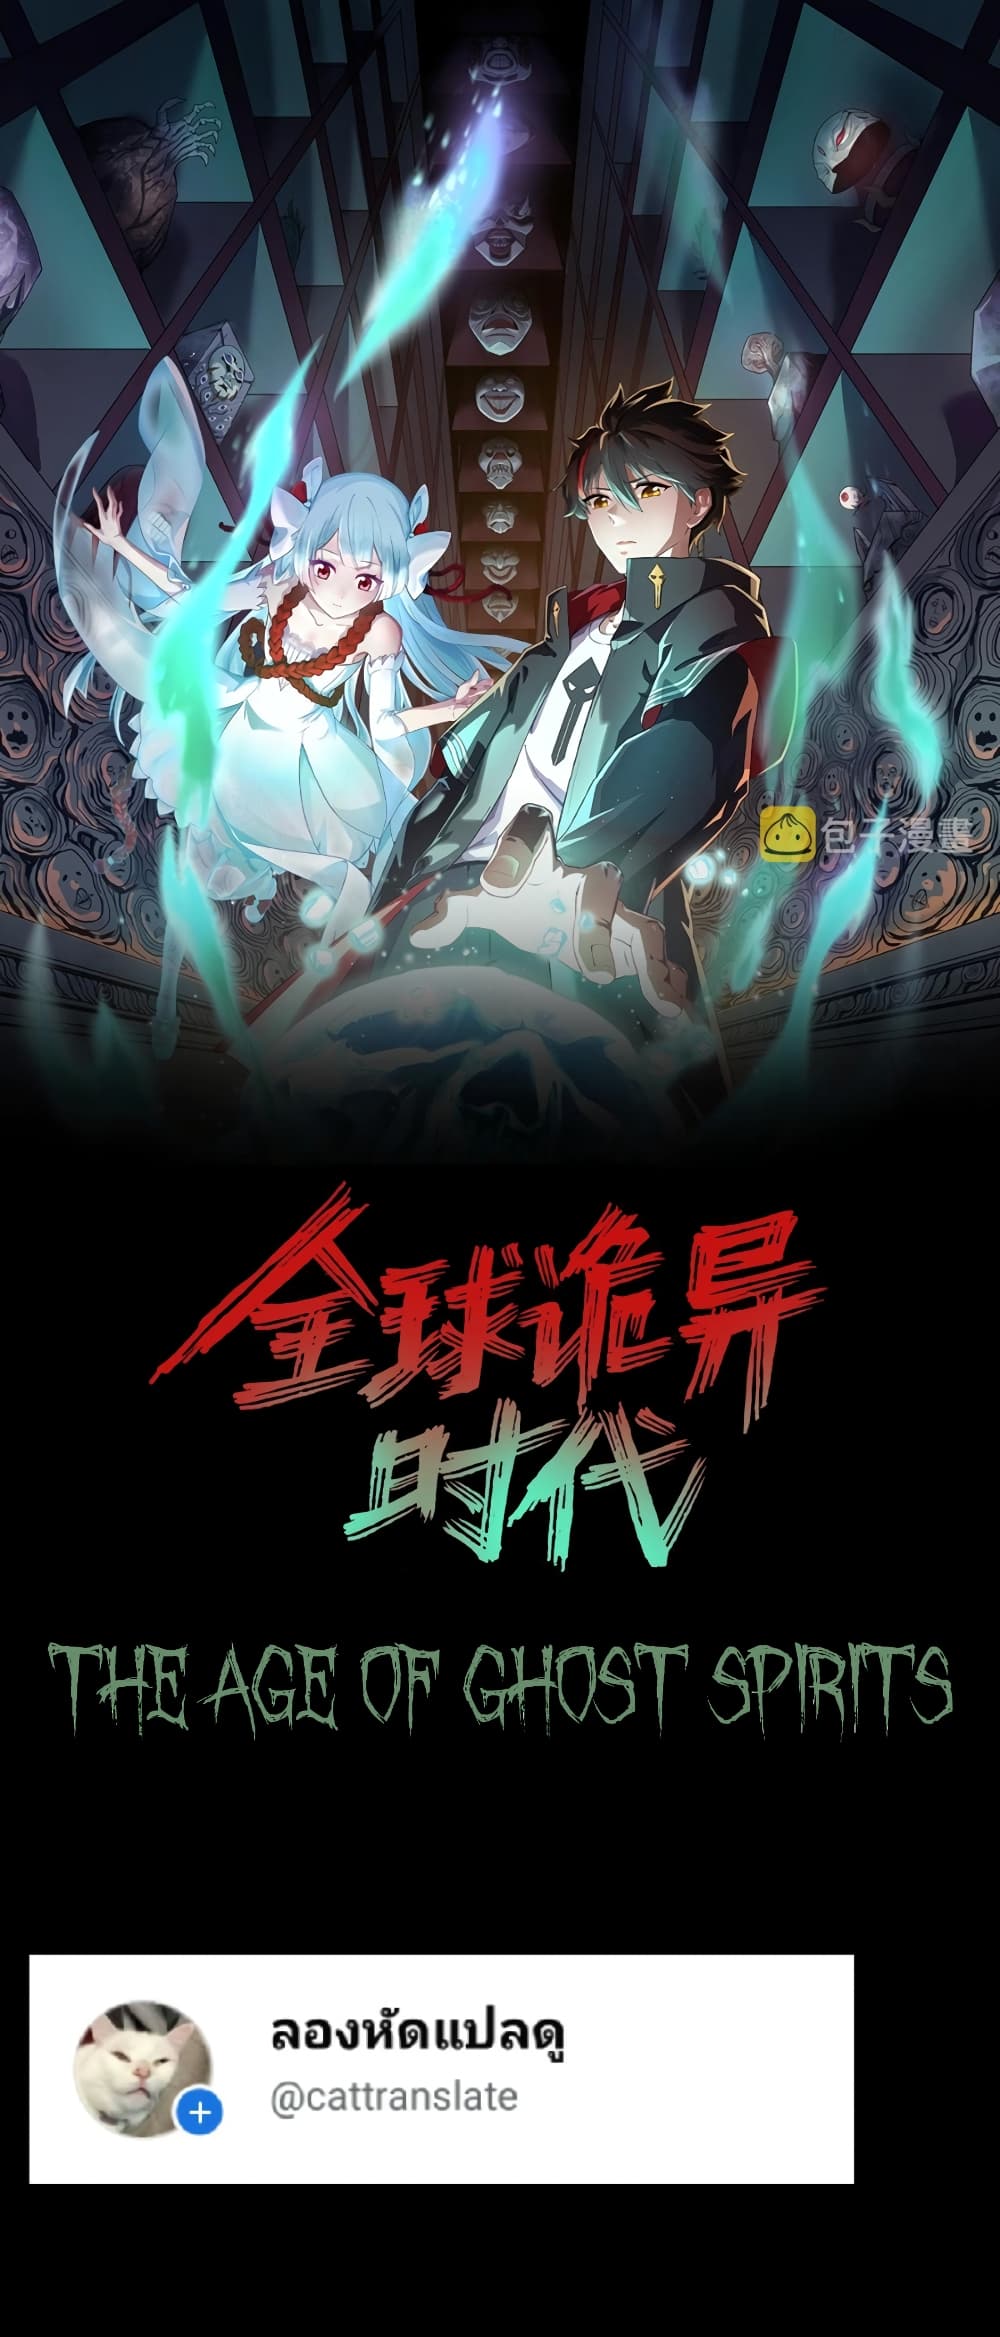 The Age of Ghost Spirits à¸à¸­à¸à¸à¸µà¹ 40 (1)